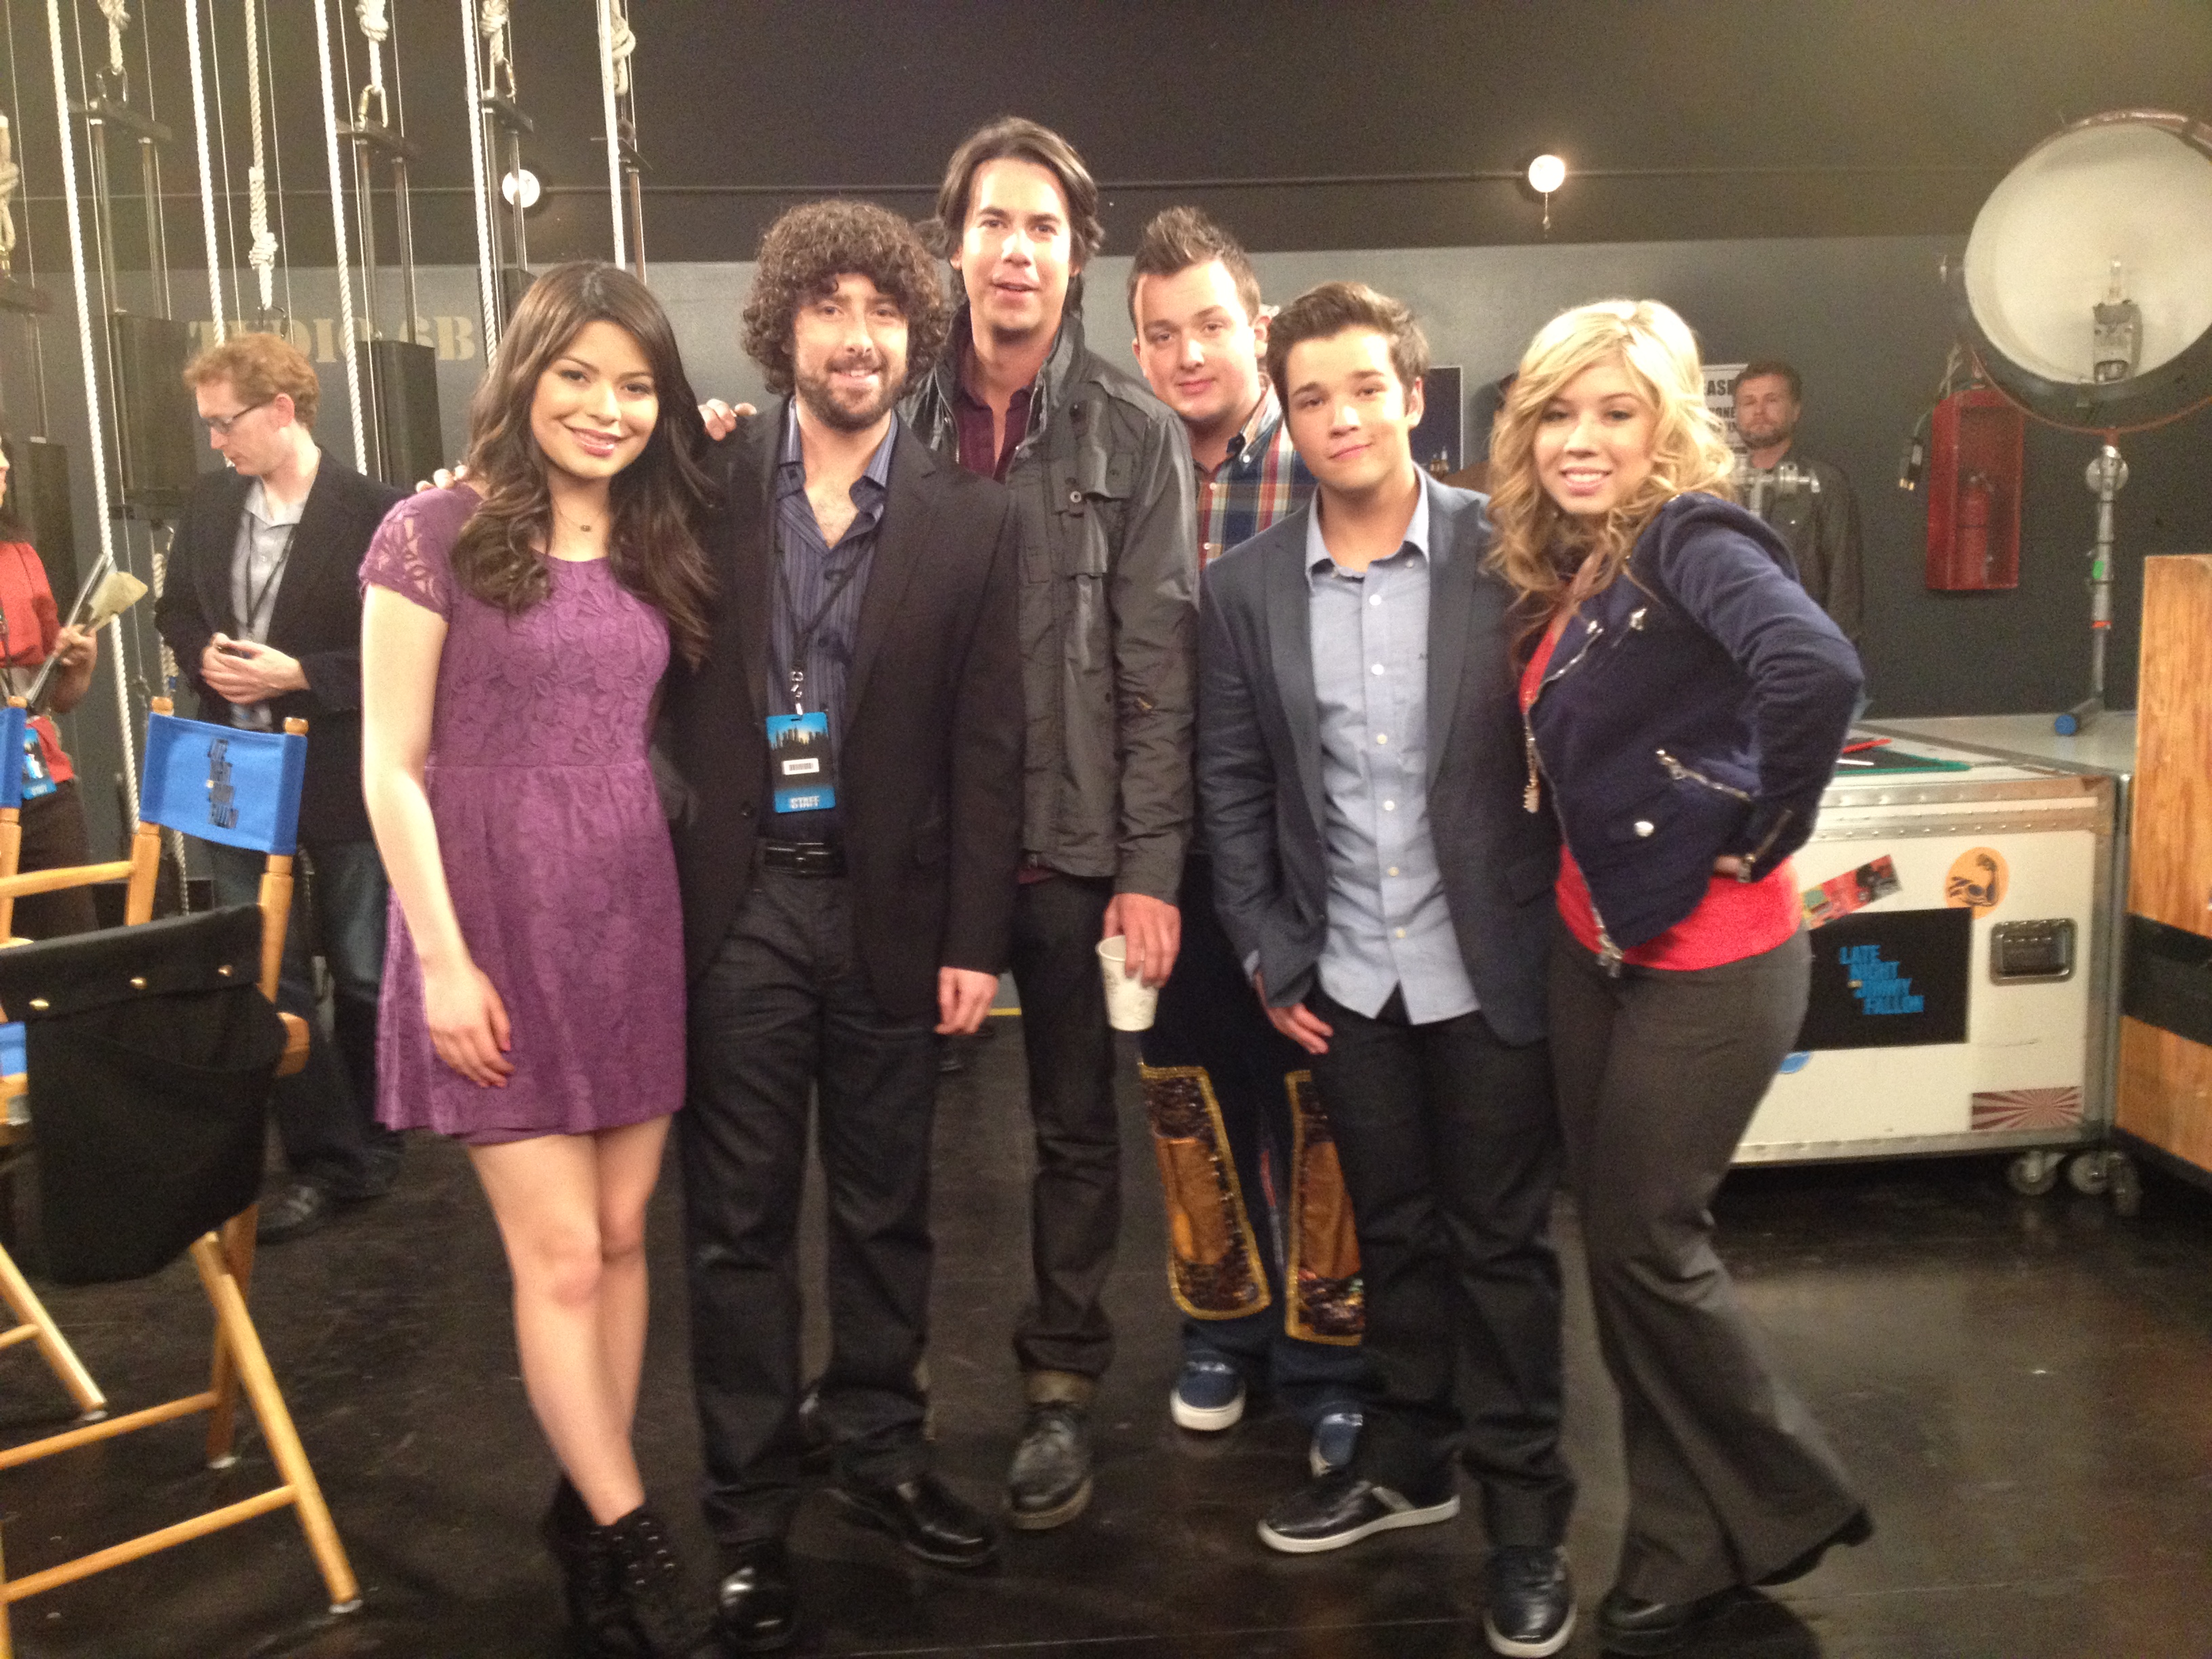 Andy Goldenberg as Jason Gipps on iCarly's 